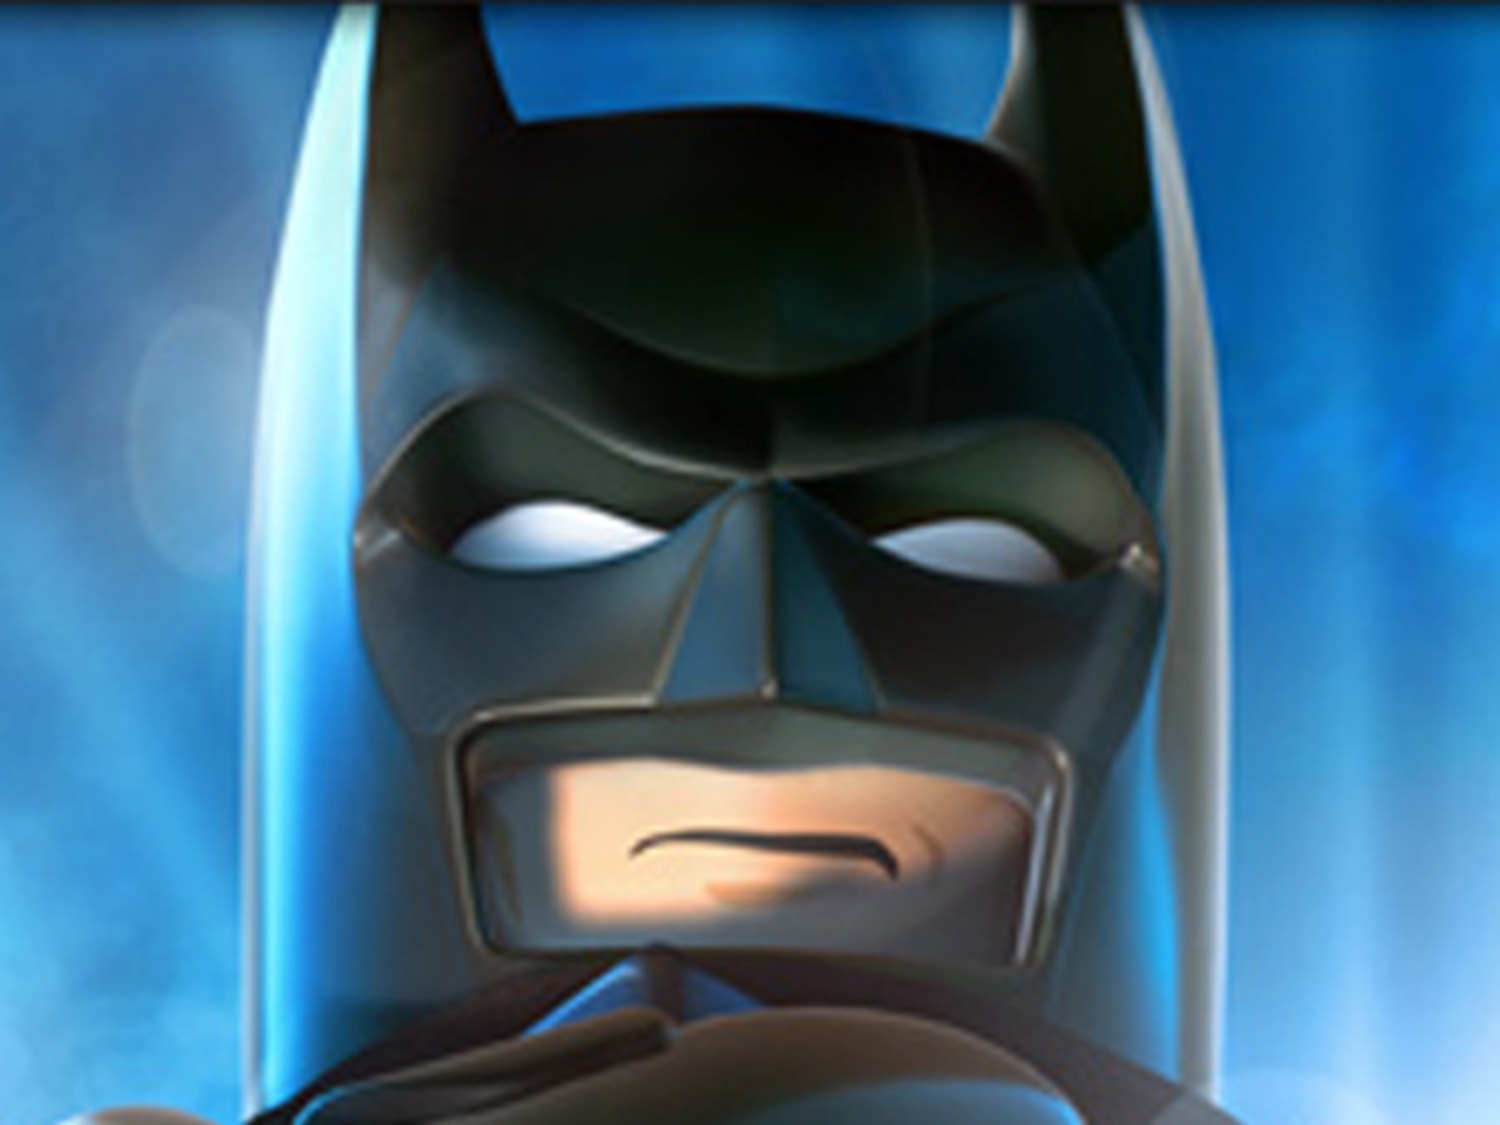 Lego Batman 2' is the best Lego game yet